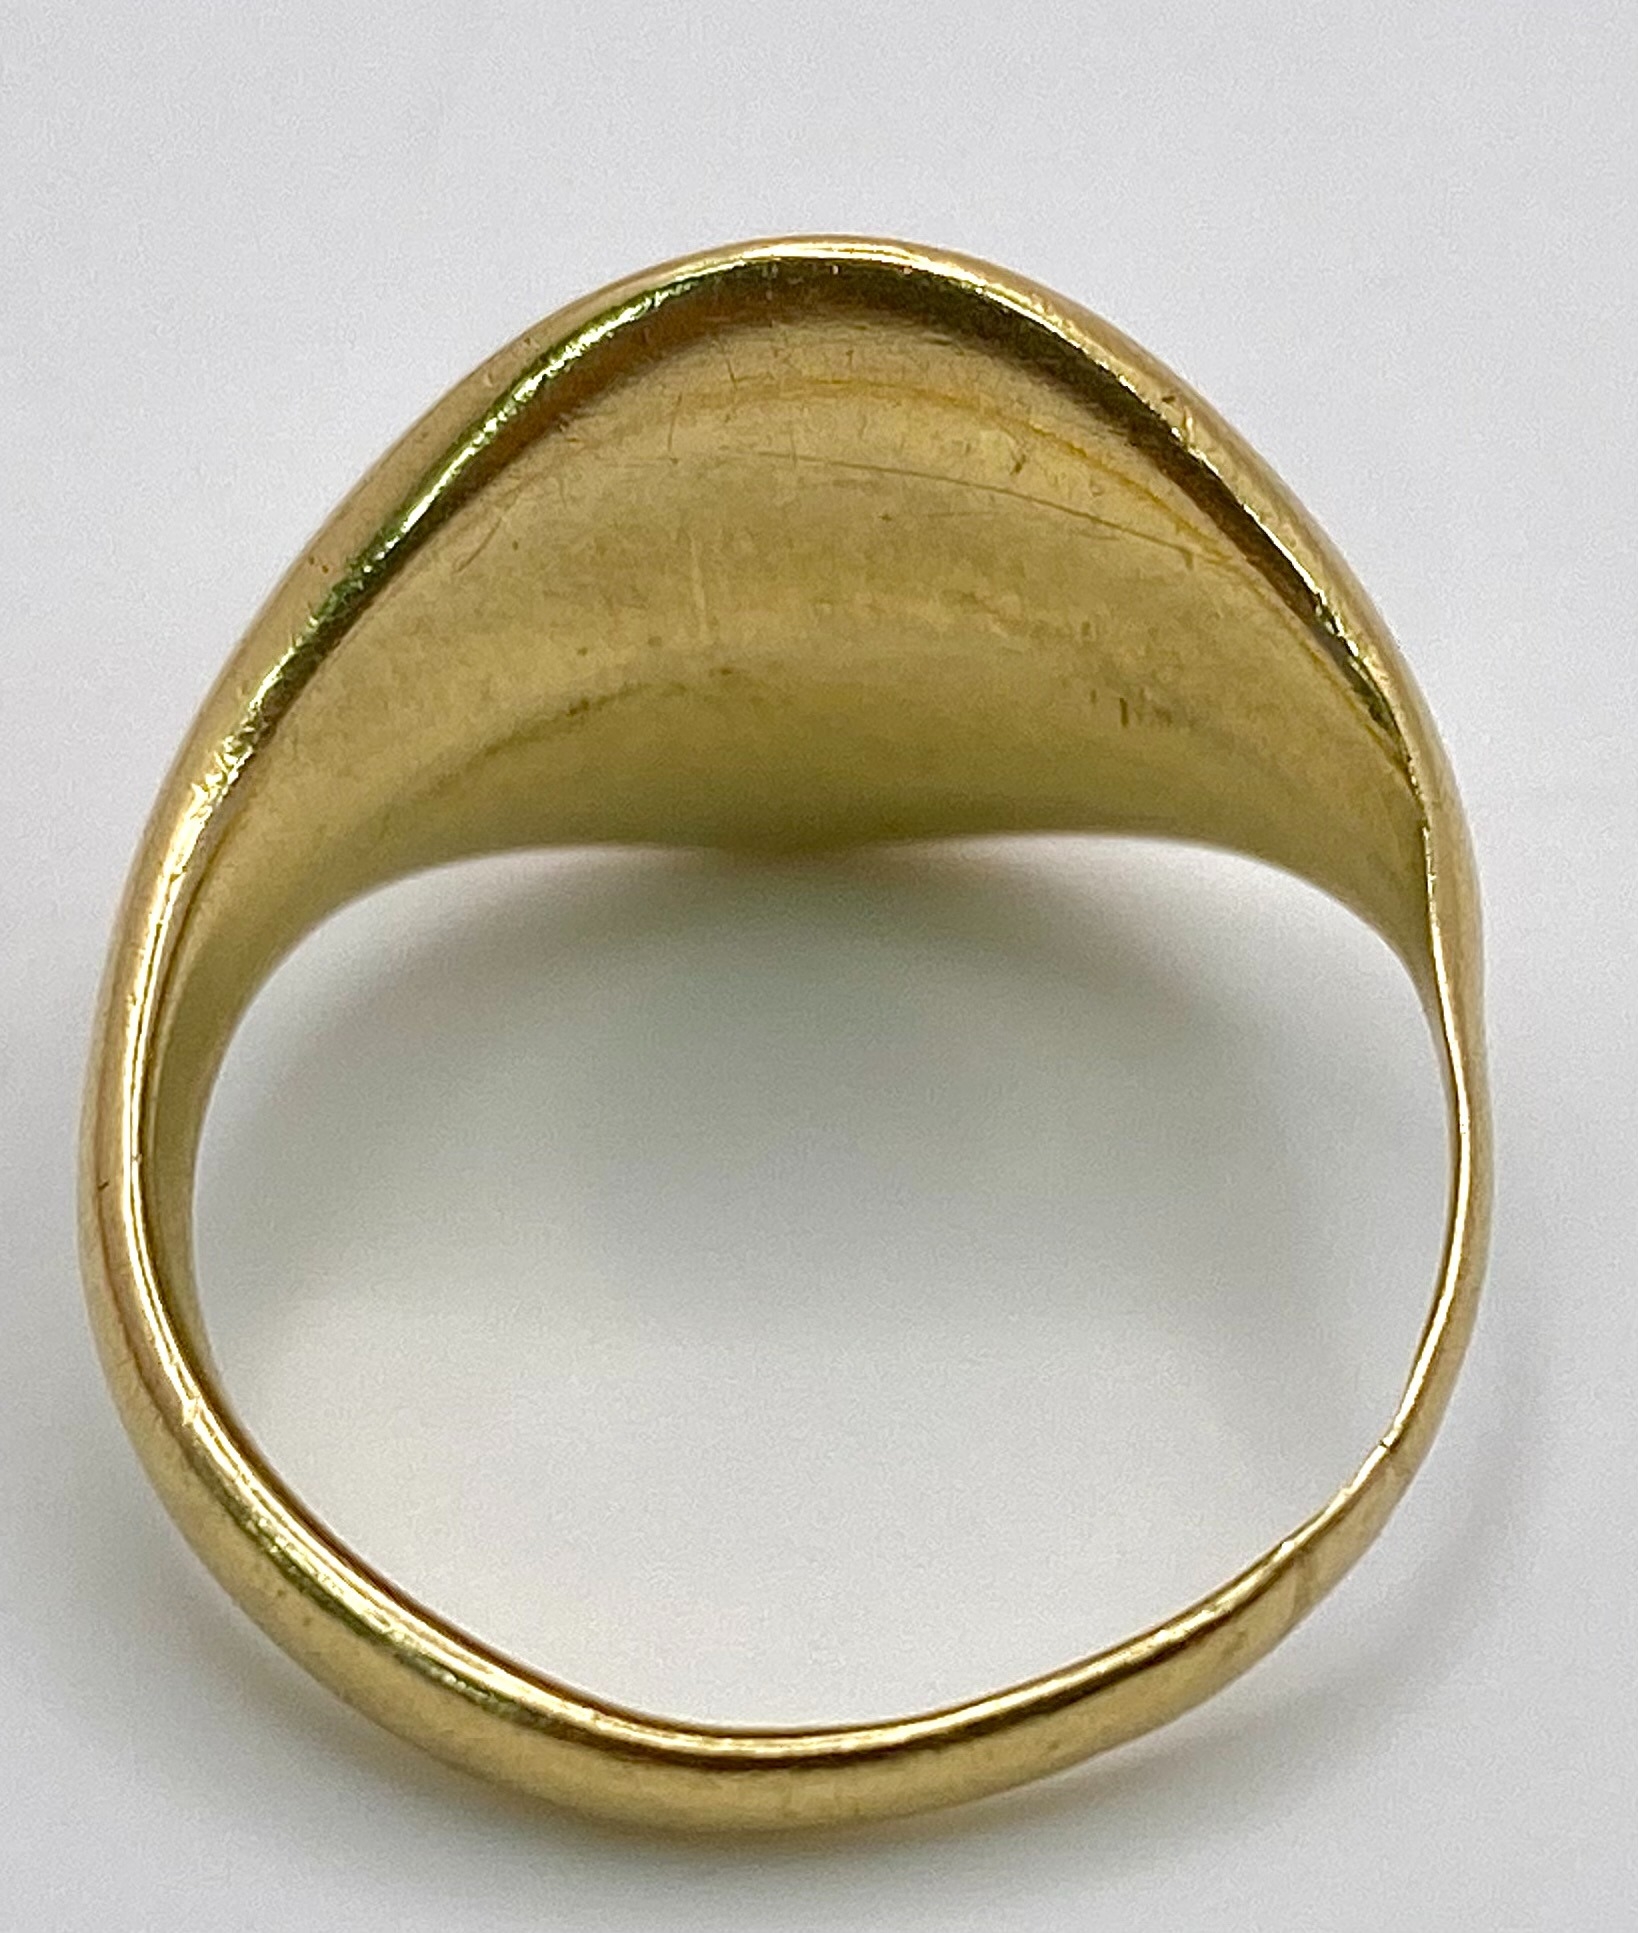 AN 18K YELLOW GOLD VINTAGE SEAL ENGRAVED SIGNET RING. Size K, 7.8g total weight. Ref: SC 8060 - Image 5 of 9